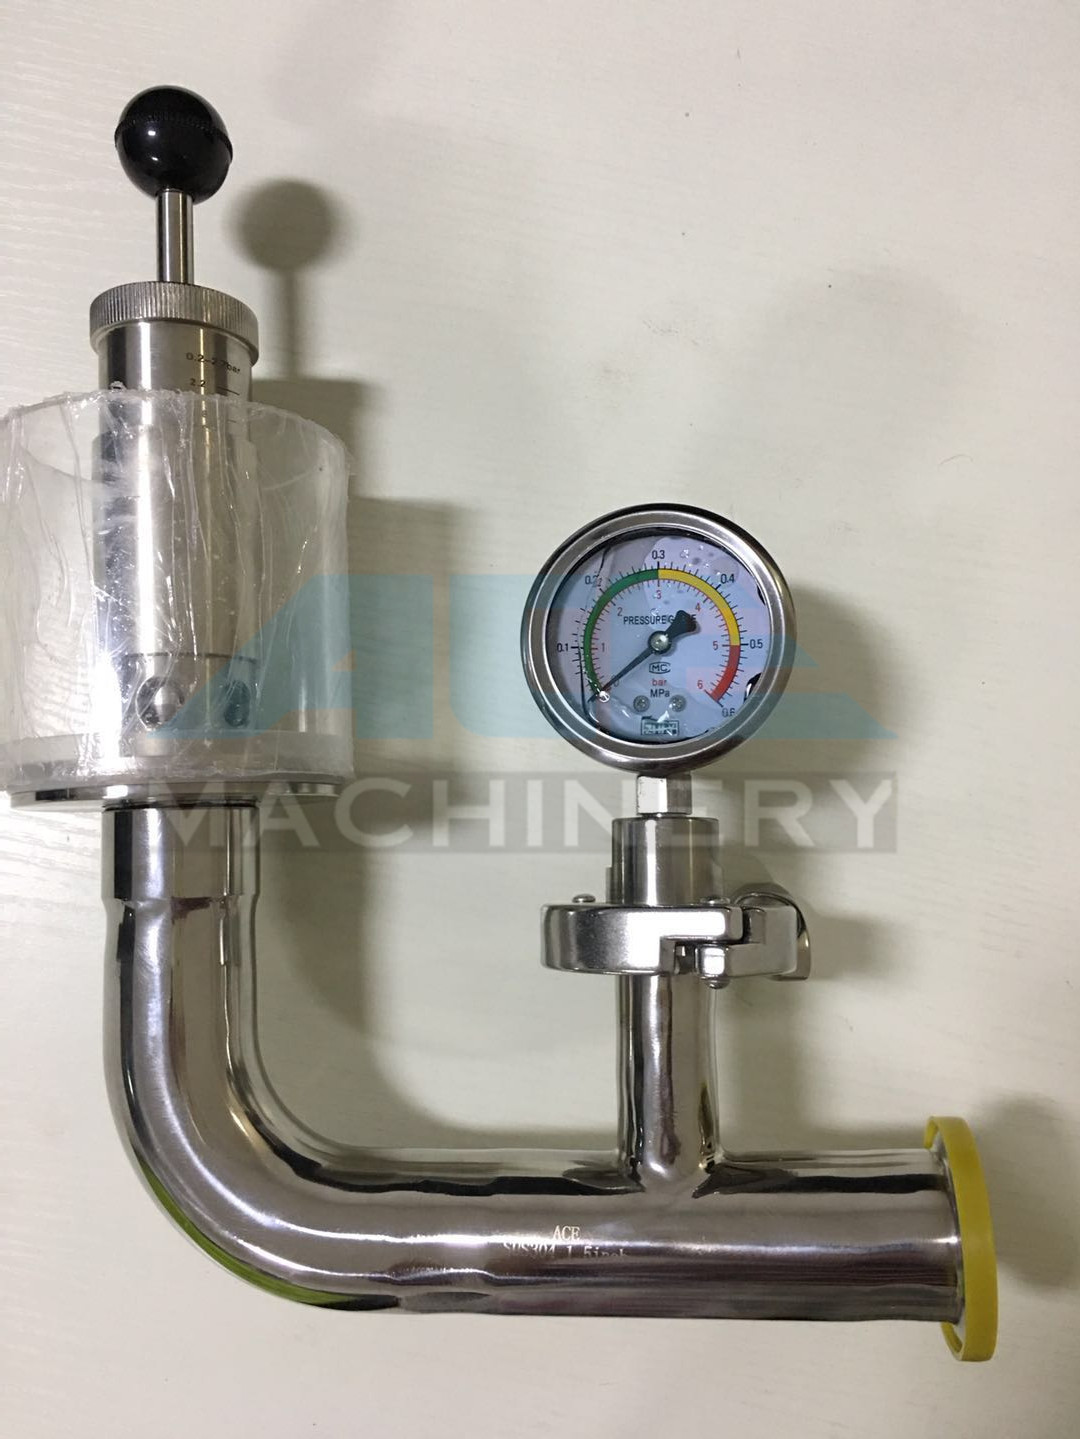 Cheap Stainless Steel Spring Pressure Relief Valve for Tank  Relief Valve with Manometer for Fermentation Tank for sale